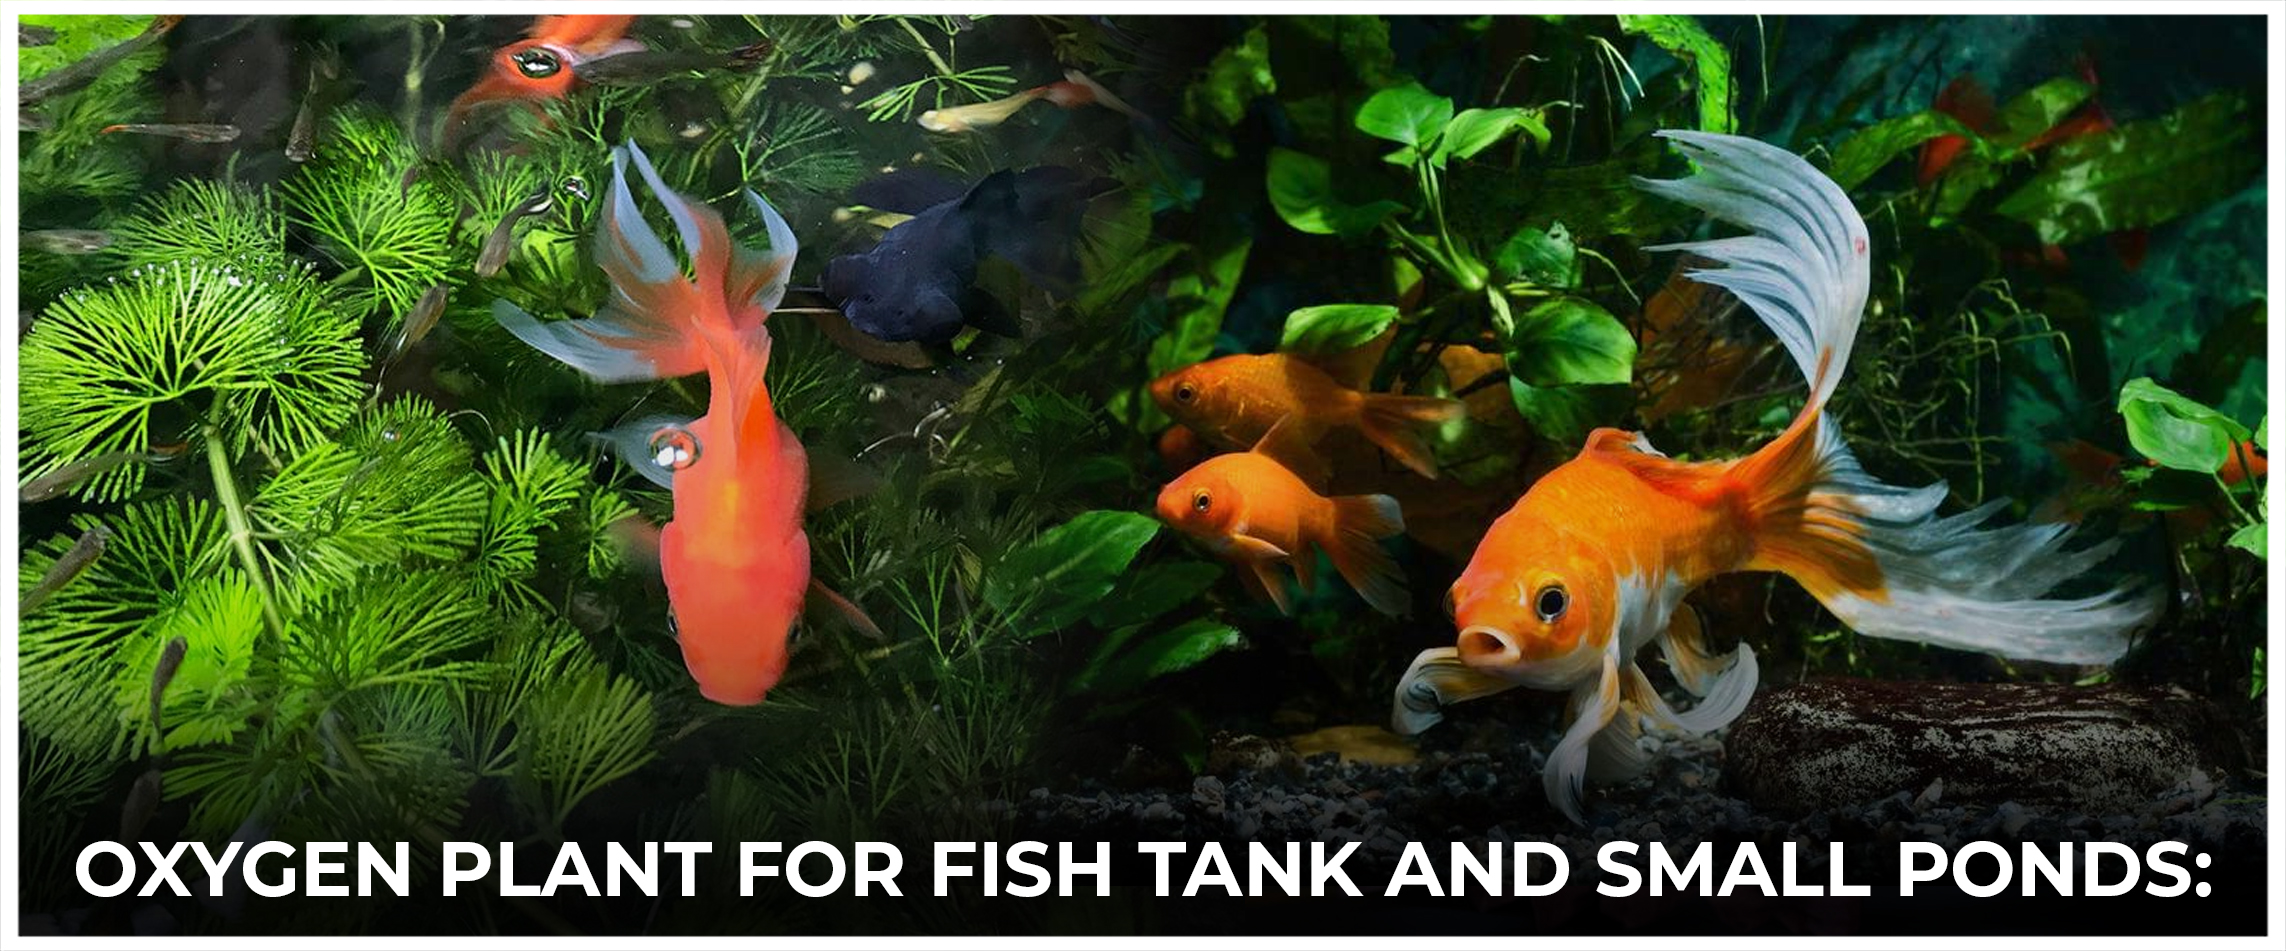  Oxygen Plant For Fish Tank and Small Ponds